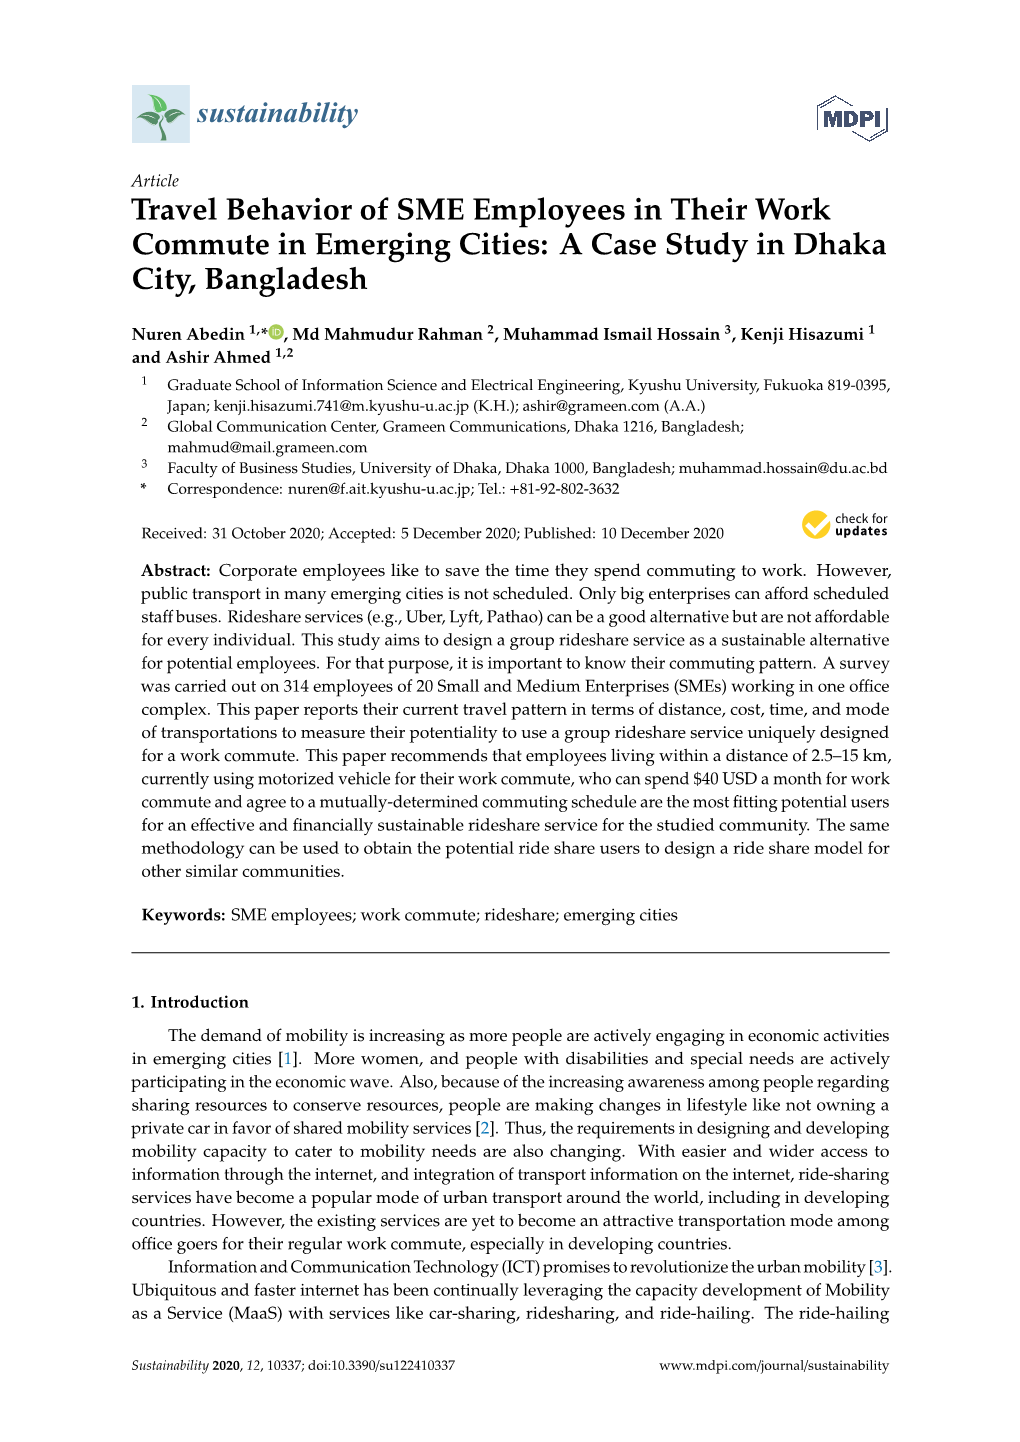 Travel Behavior of SME Employees in Their Work Commute in Emerging Cities: a Case Study in Dhaka City, Bangladesh